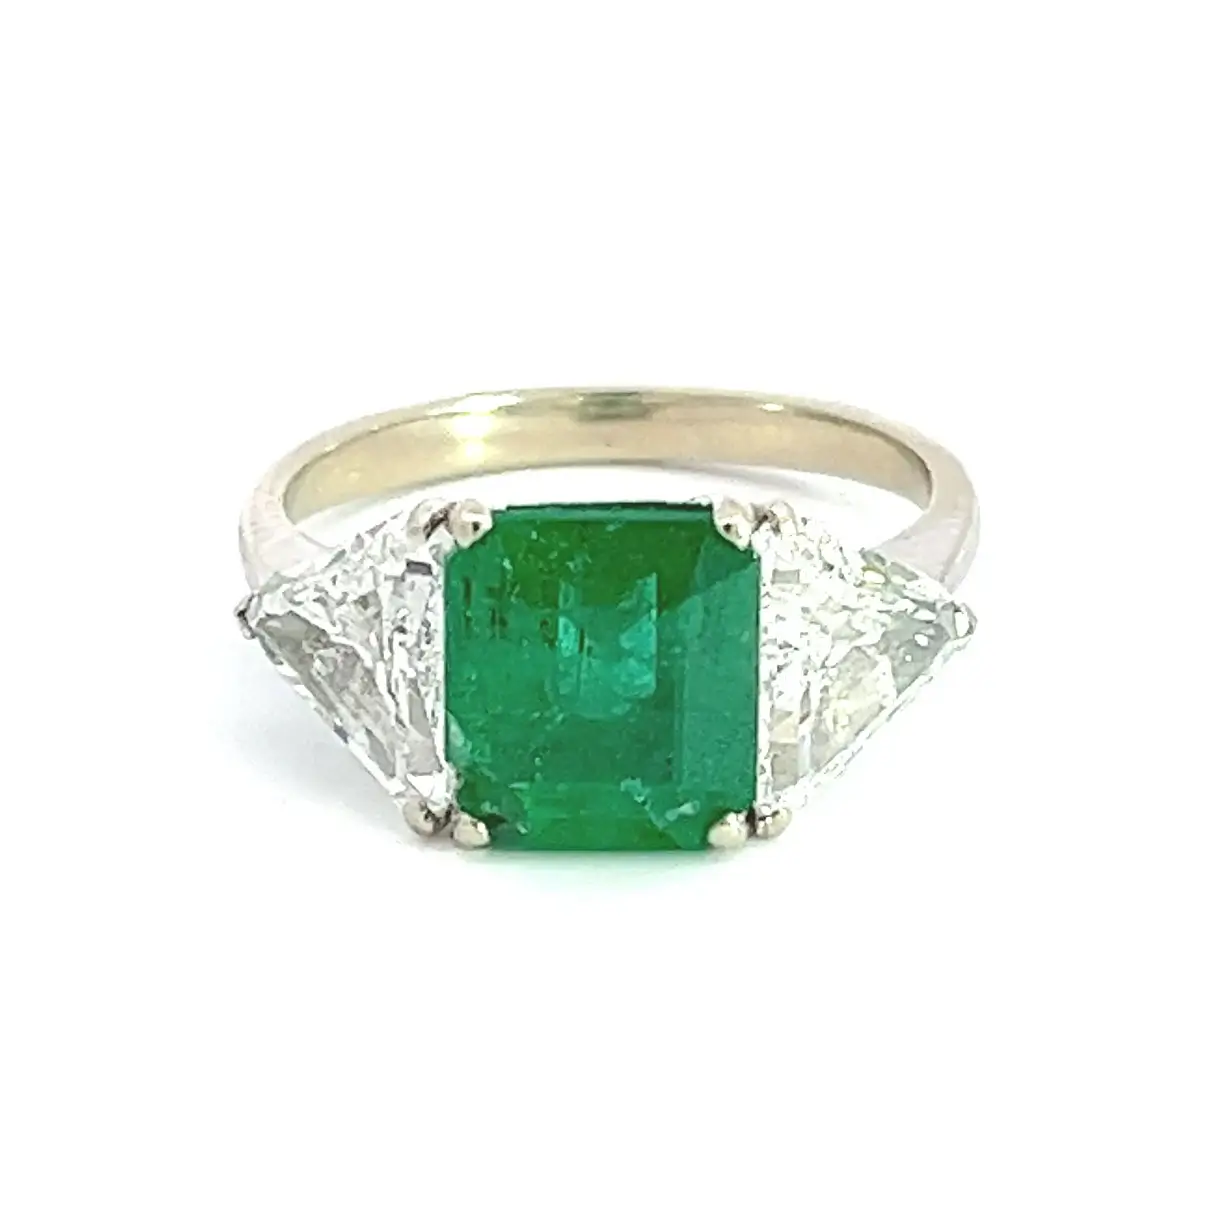 Green Colombian emerald and diamond ring